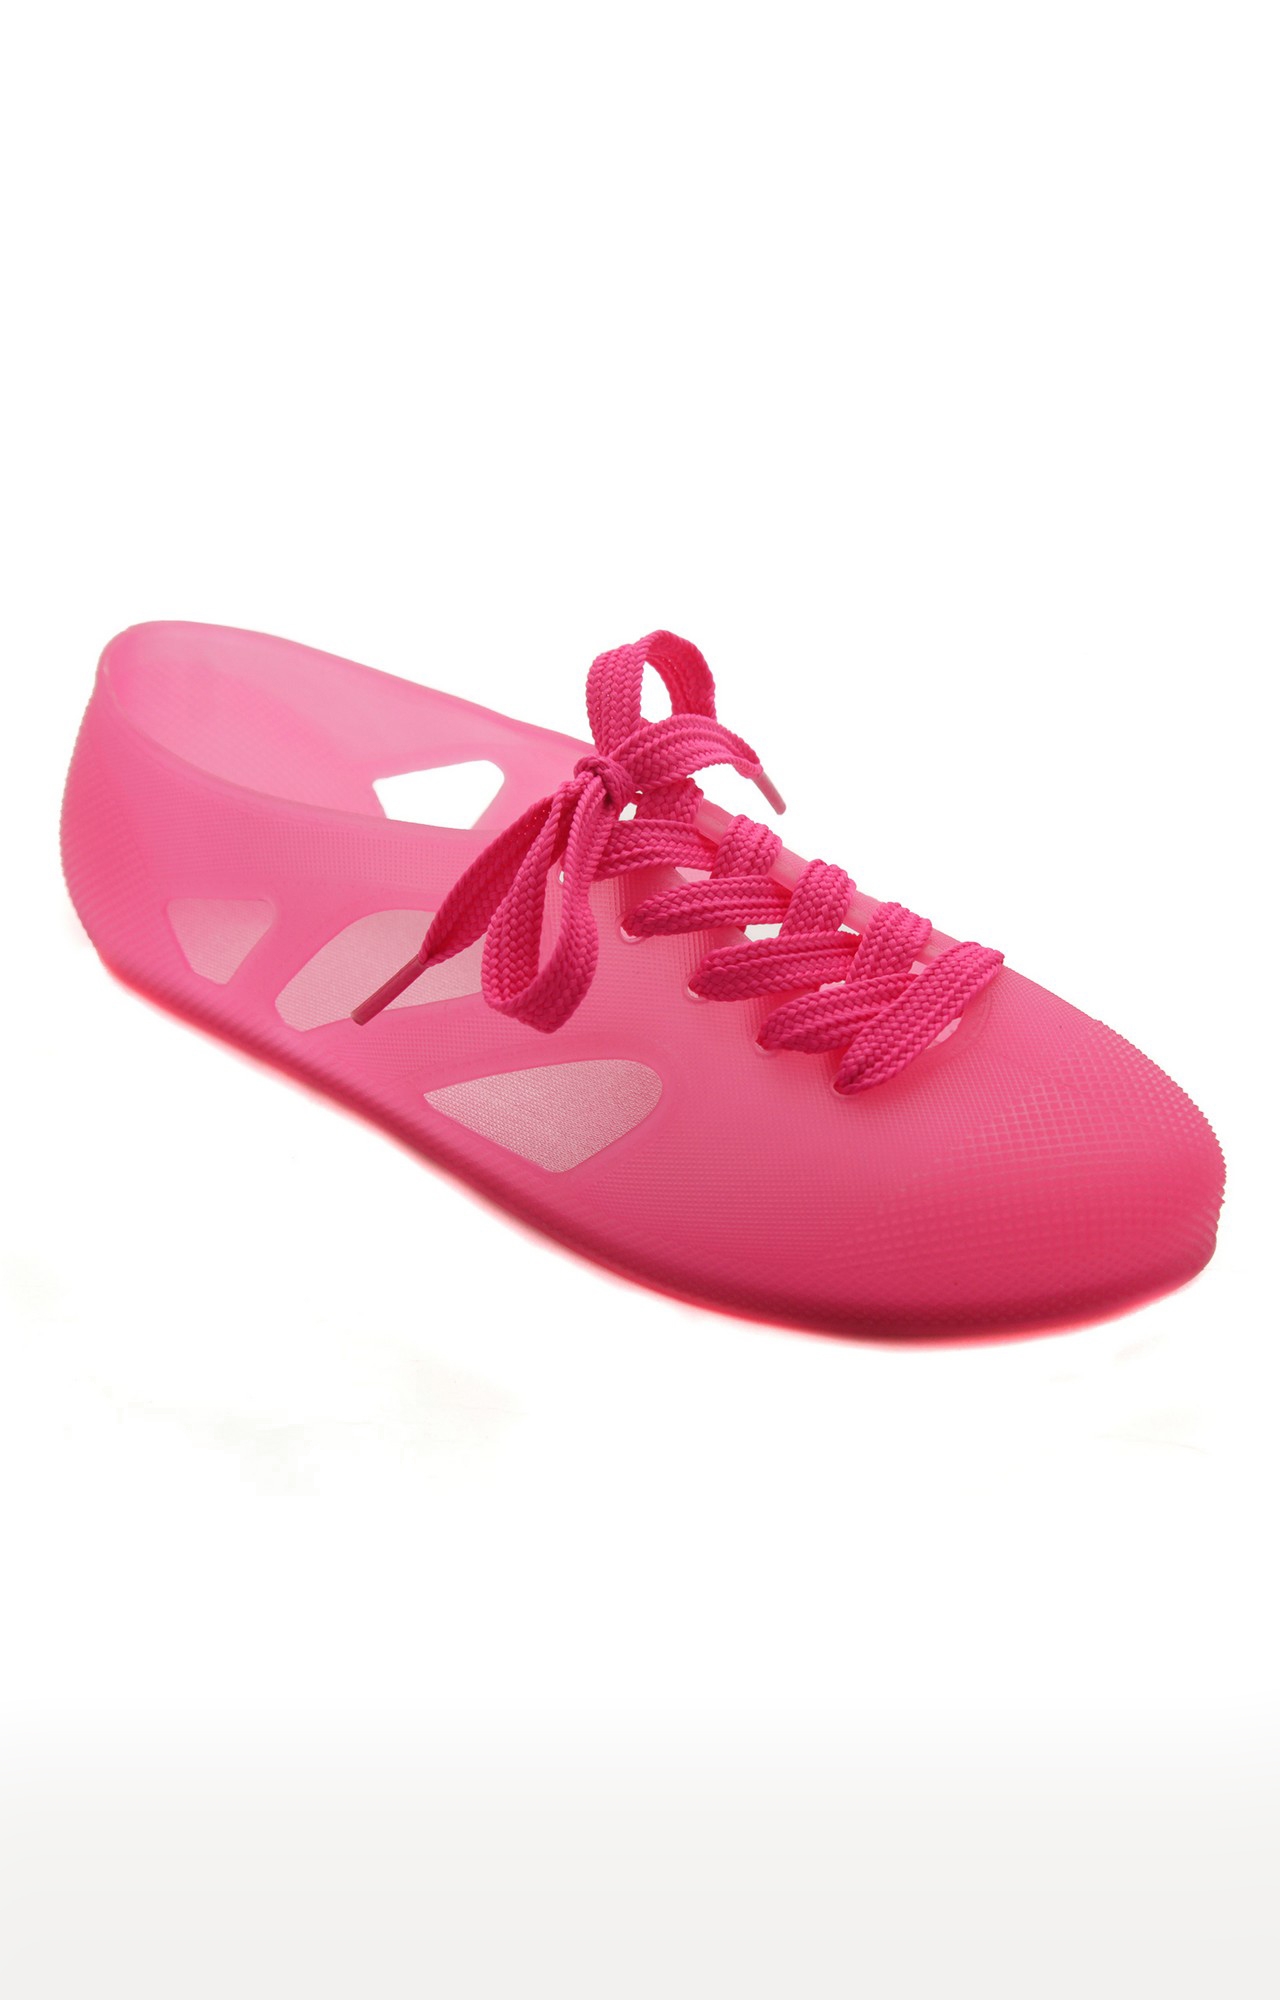 Trends & Trades Anti Slip Pink Shoes For Women